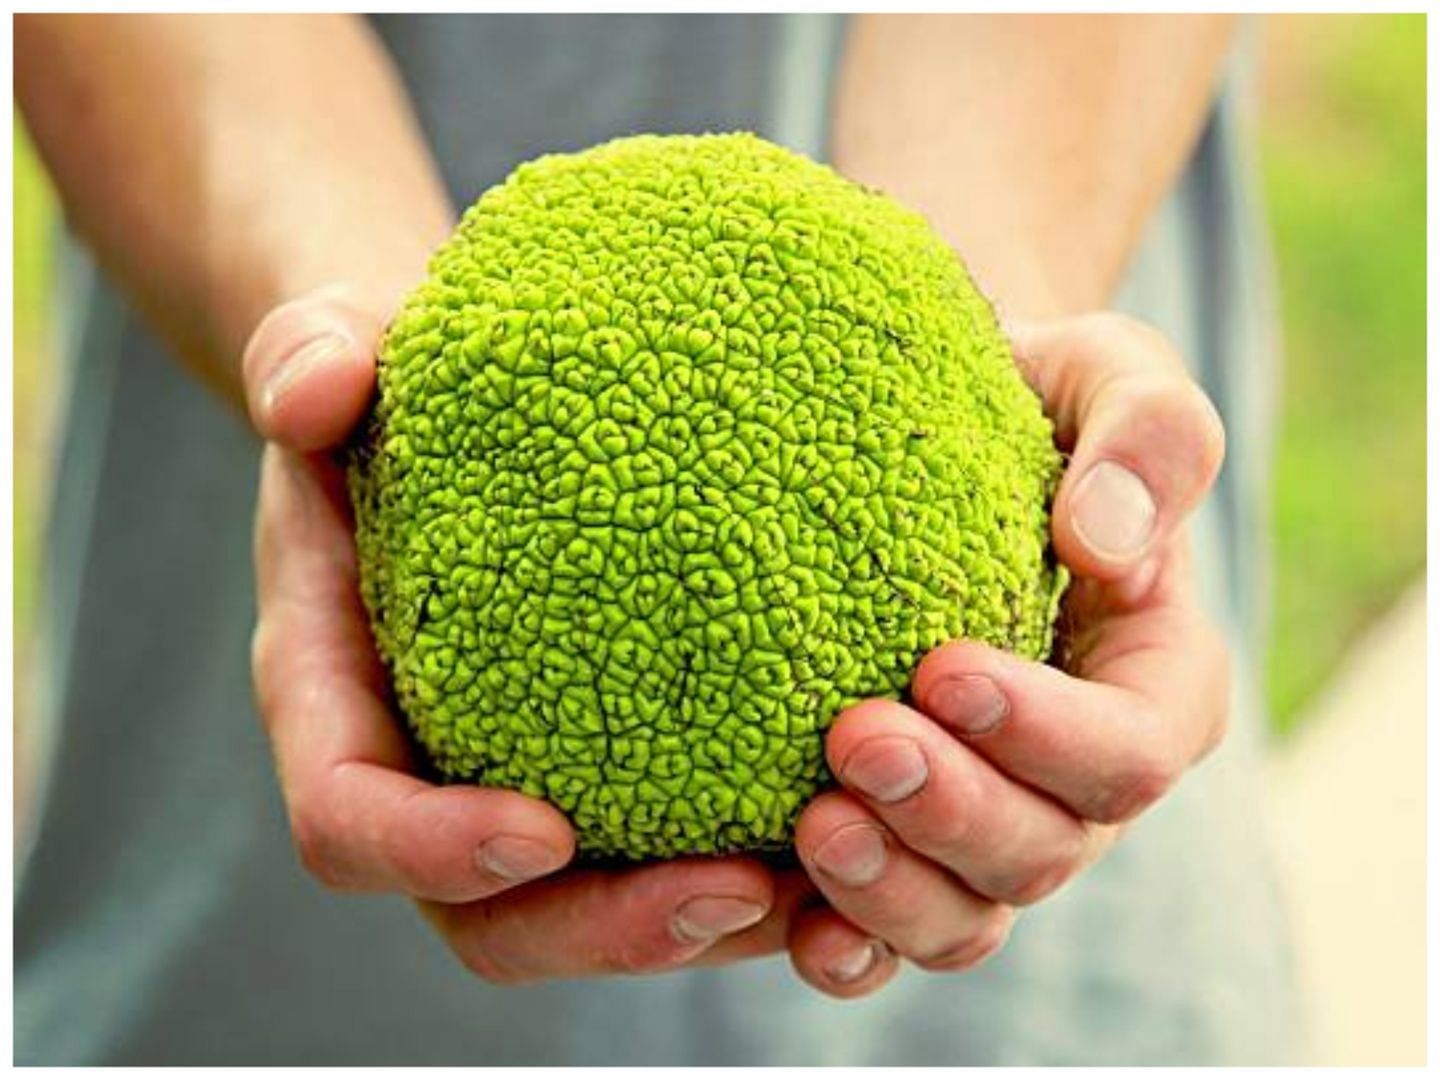 Osage orange looks very similar to Gum-Gum fruit from One Piece (Image via Getty Images)